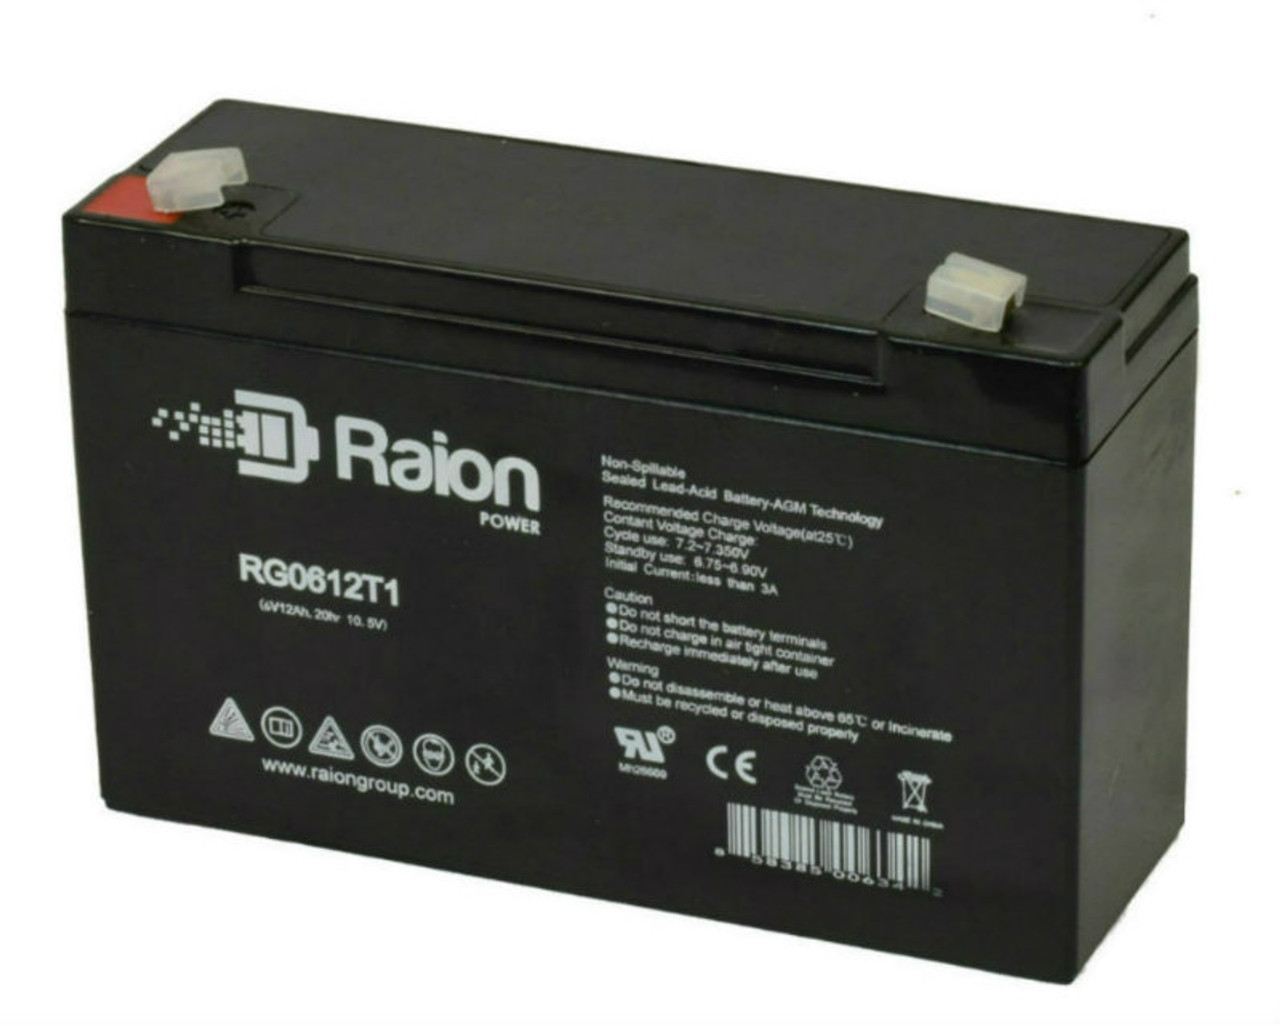 Raion Power RG06120T1 Replacement Battery for Johnson Controls GC690